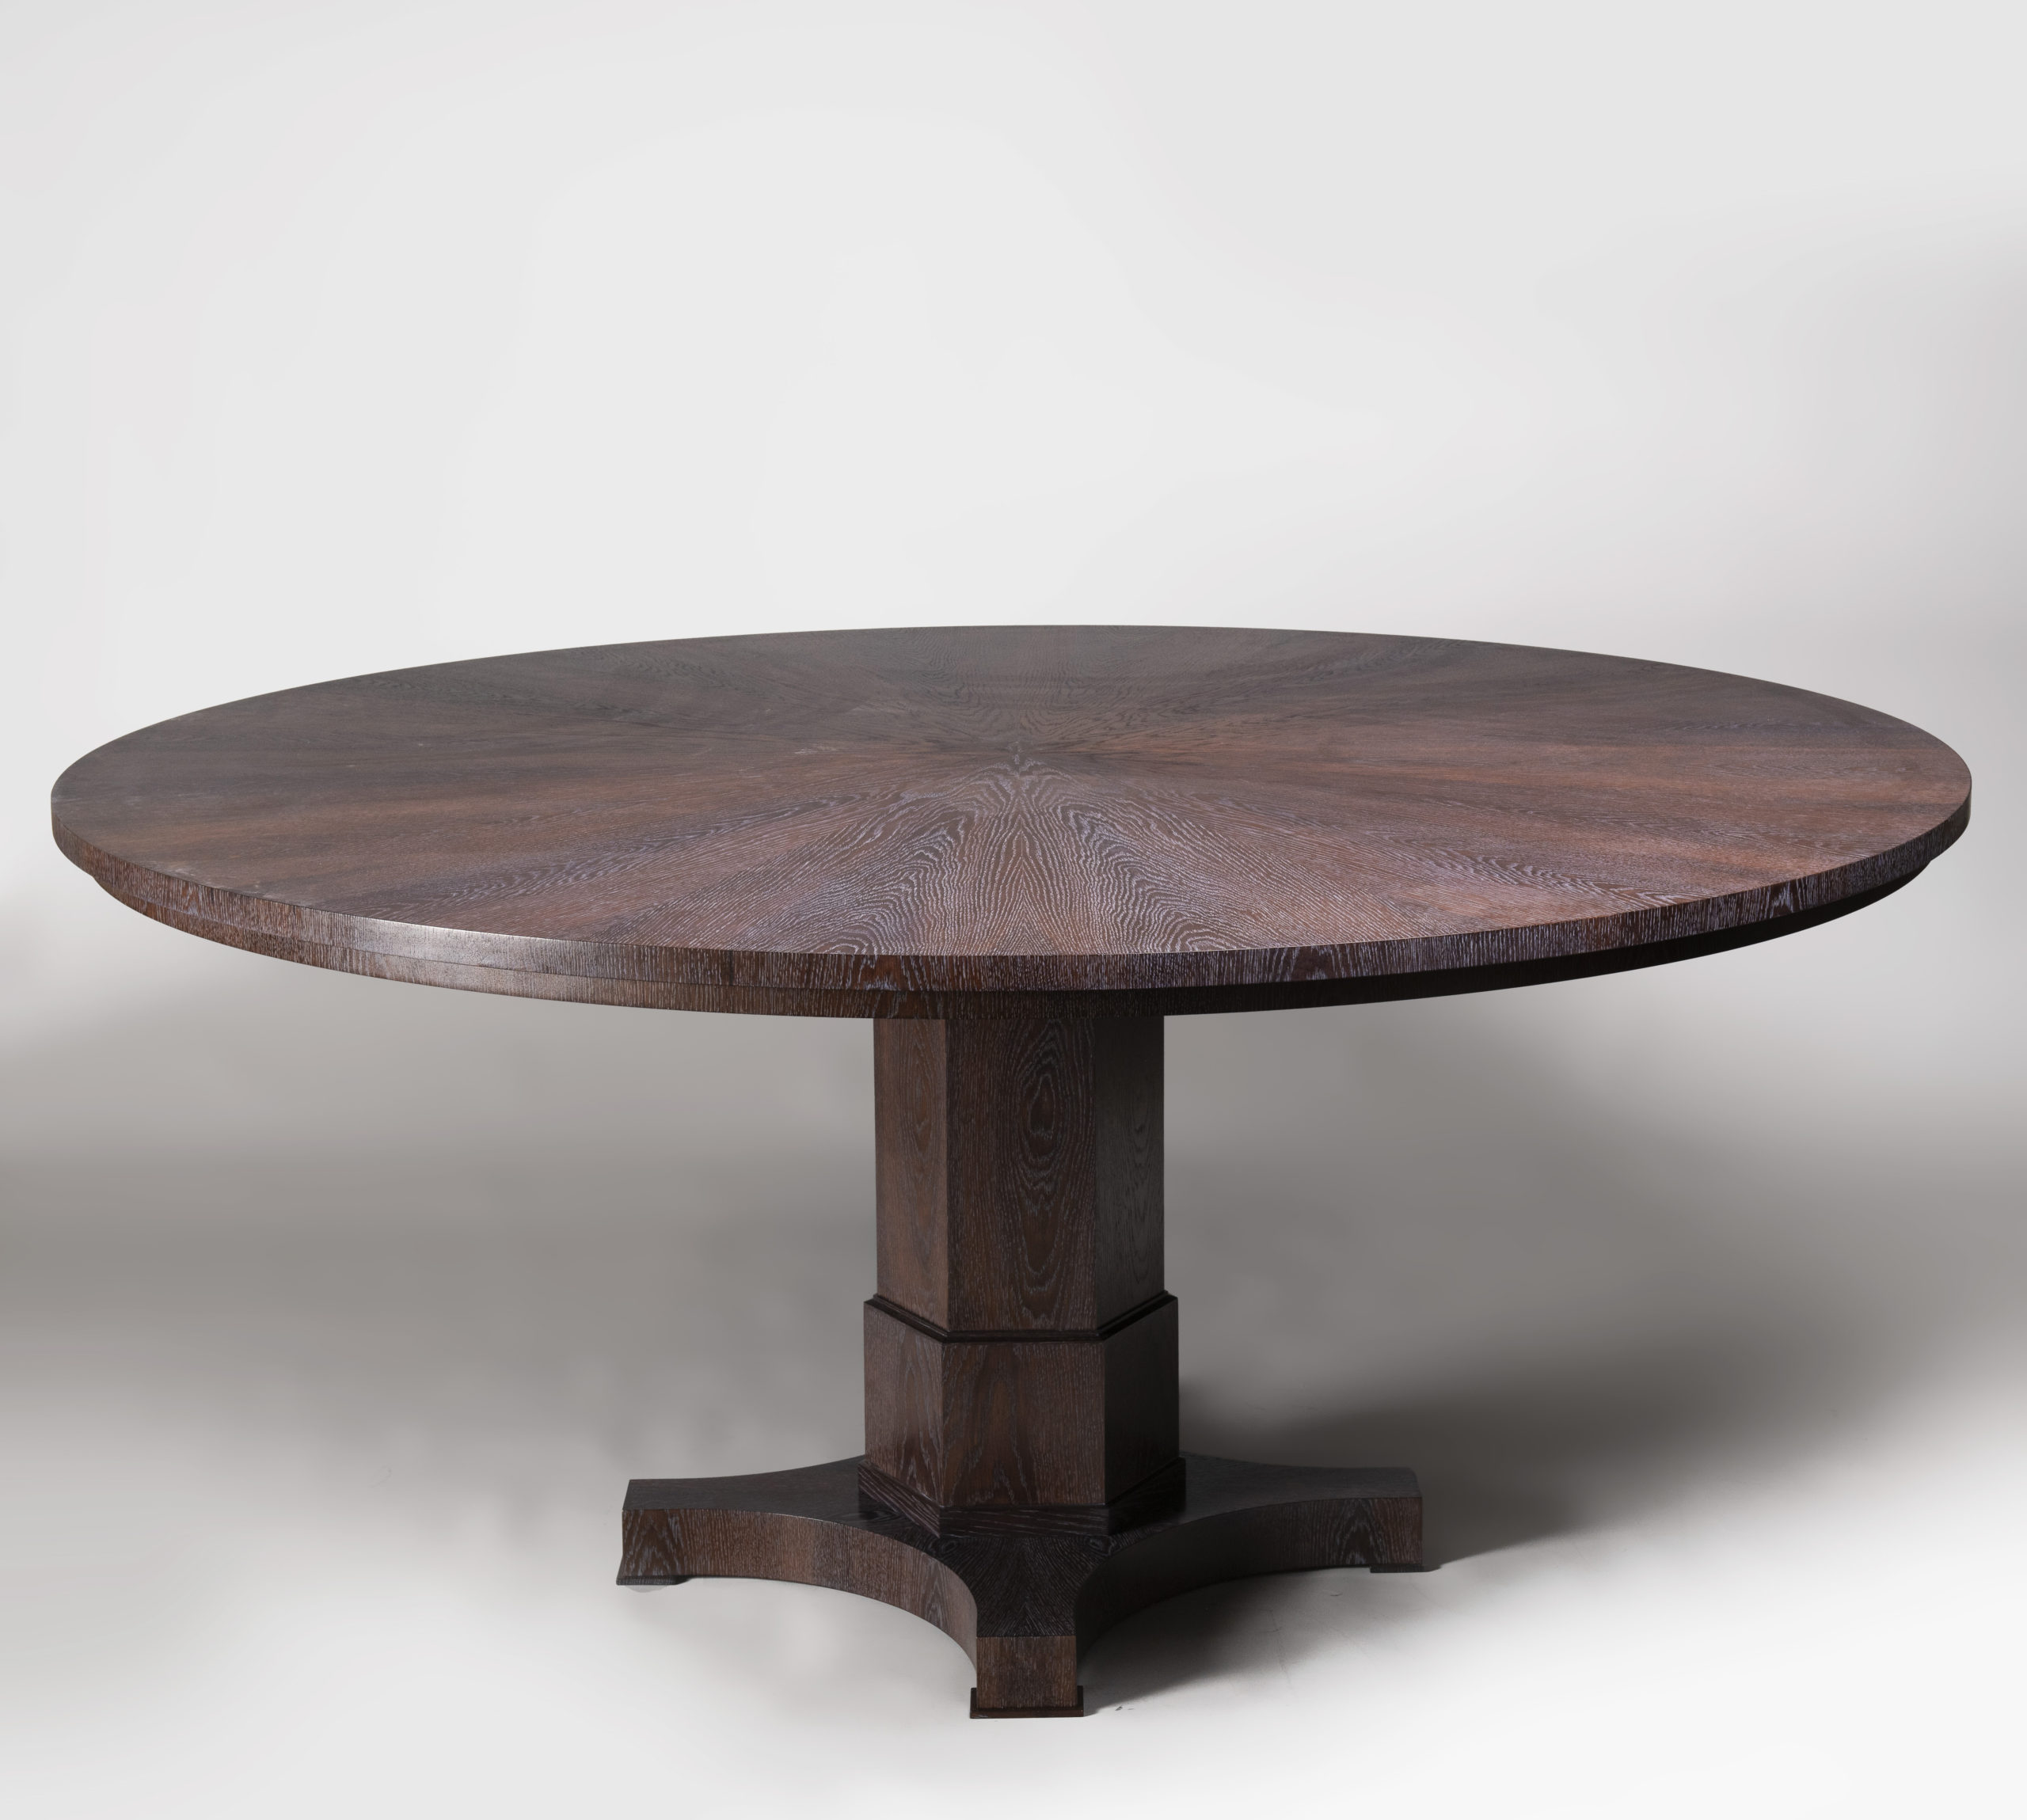 A Pedestal Dining Table by ILIAD Design